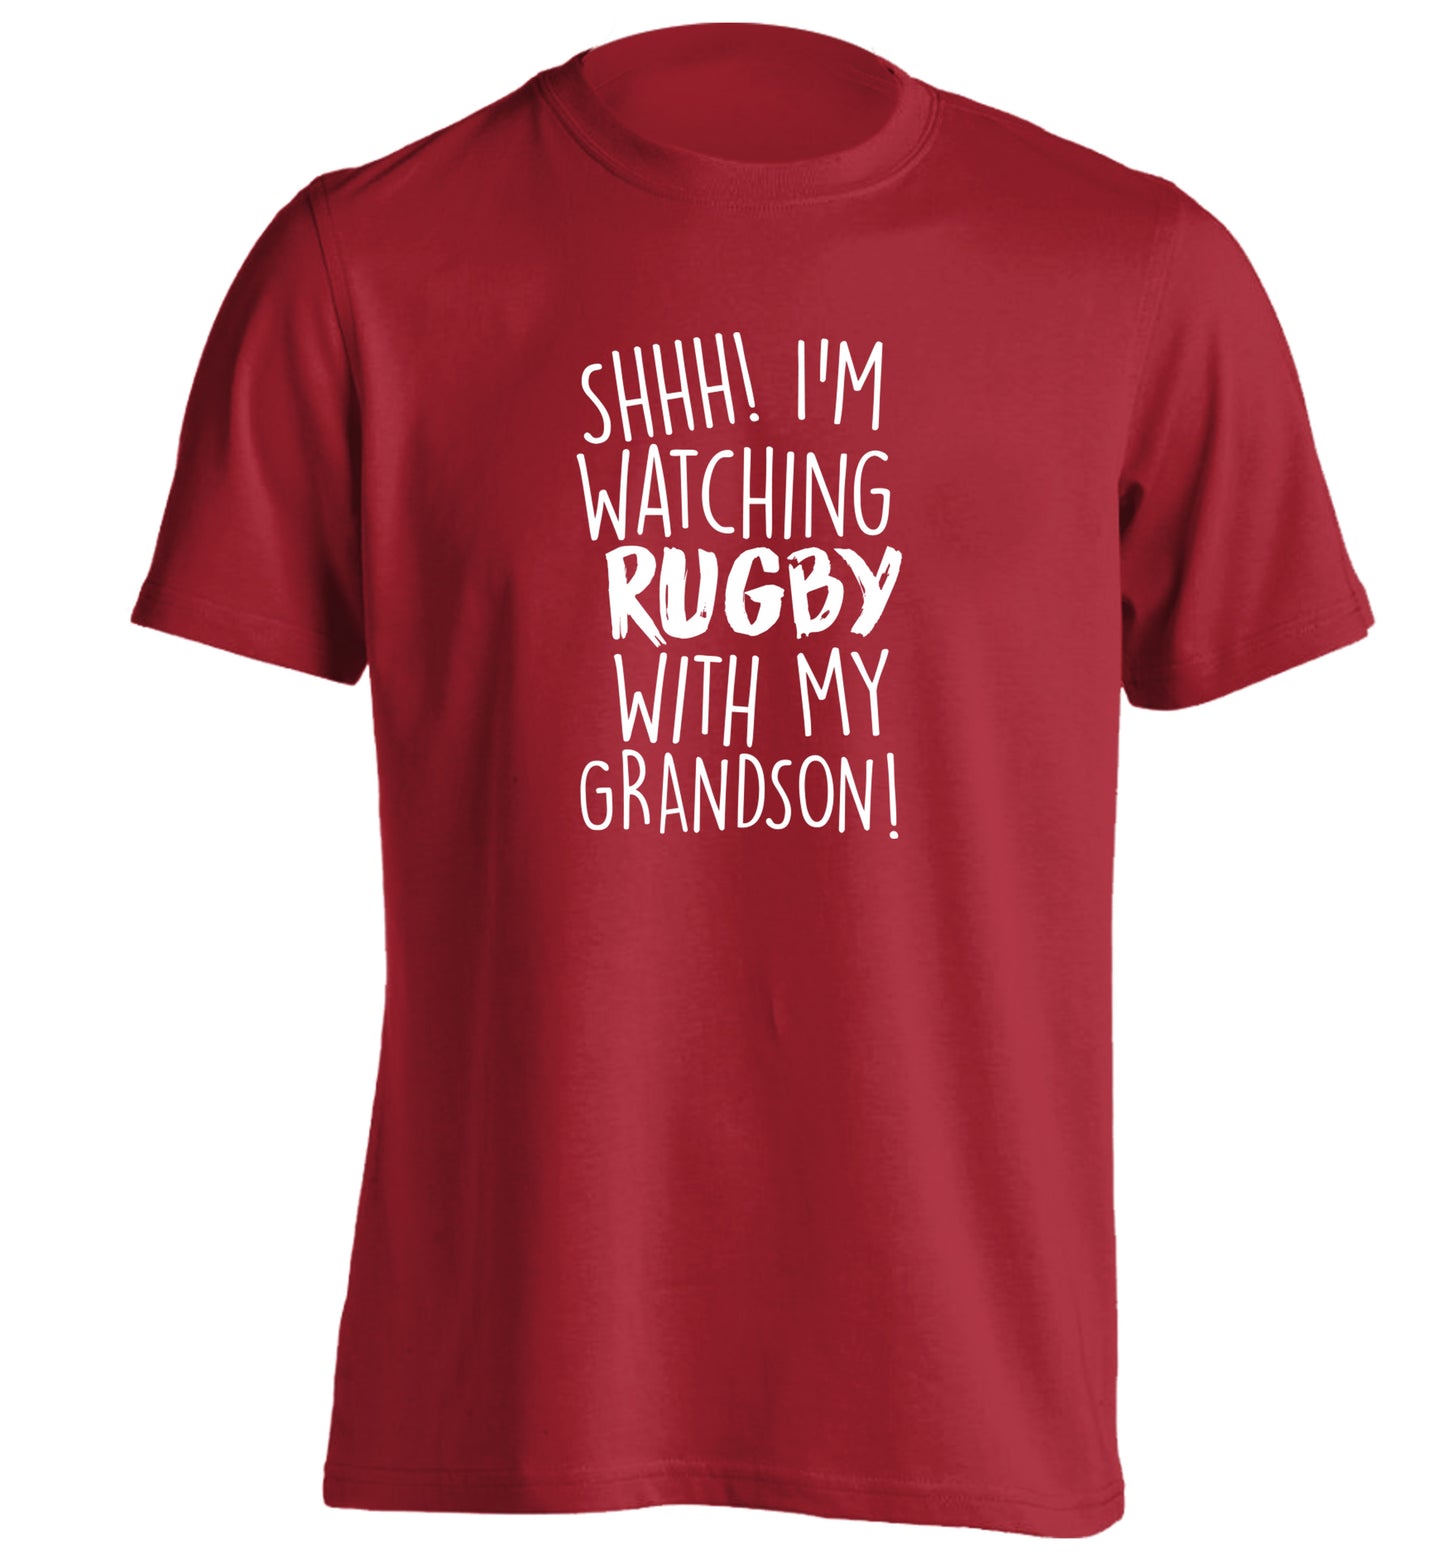 Shh I'm watching rugby with my grandson adults unisex red Tshirt 2XL